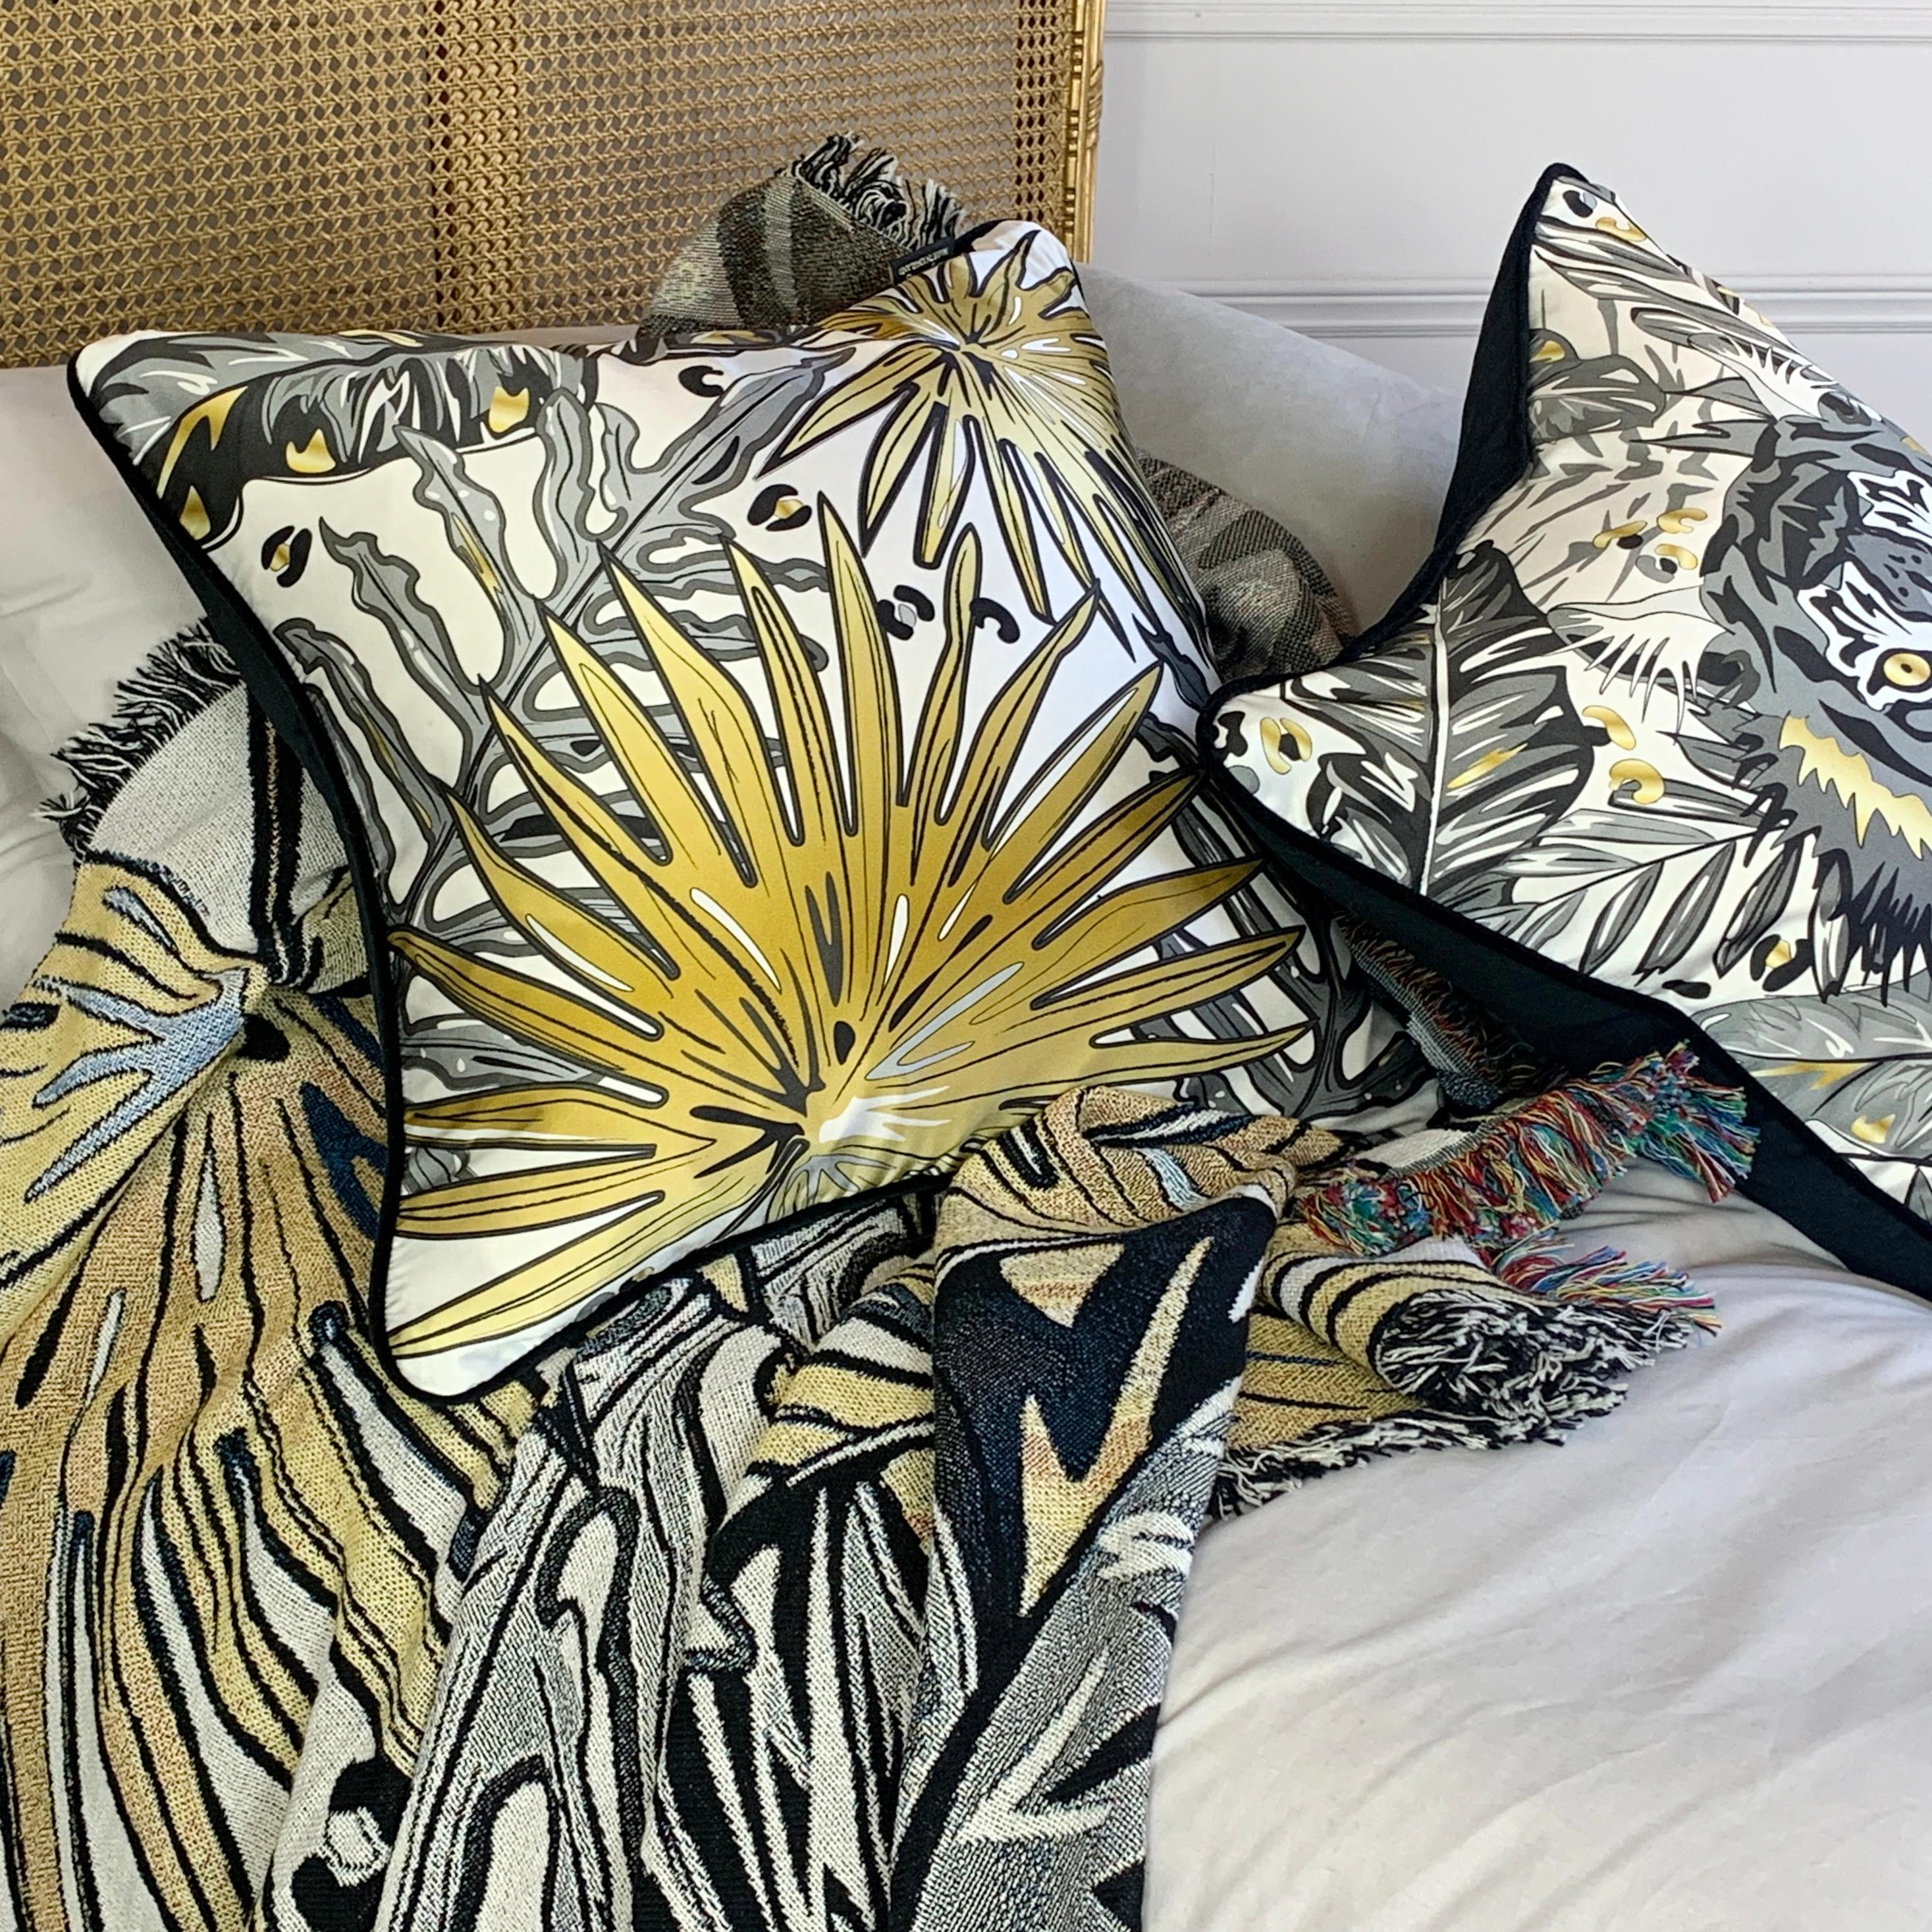 Embrace your wildest side with our luxury silk 'Palm' cushion from our Tropics range

This luxurious 100% silk cushion has a rich cotton velvet back and piped edge

Inspired by the dense rainforests of South America and Asia, and their vast canopies